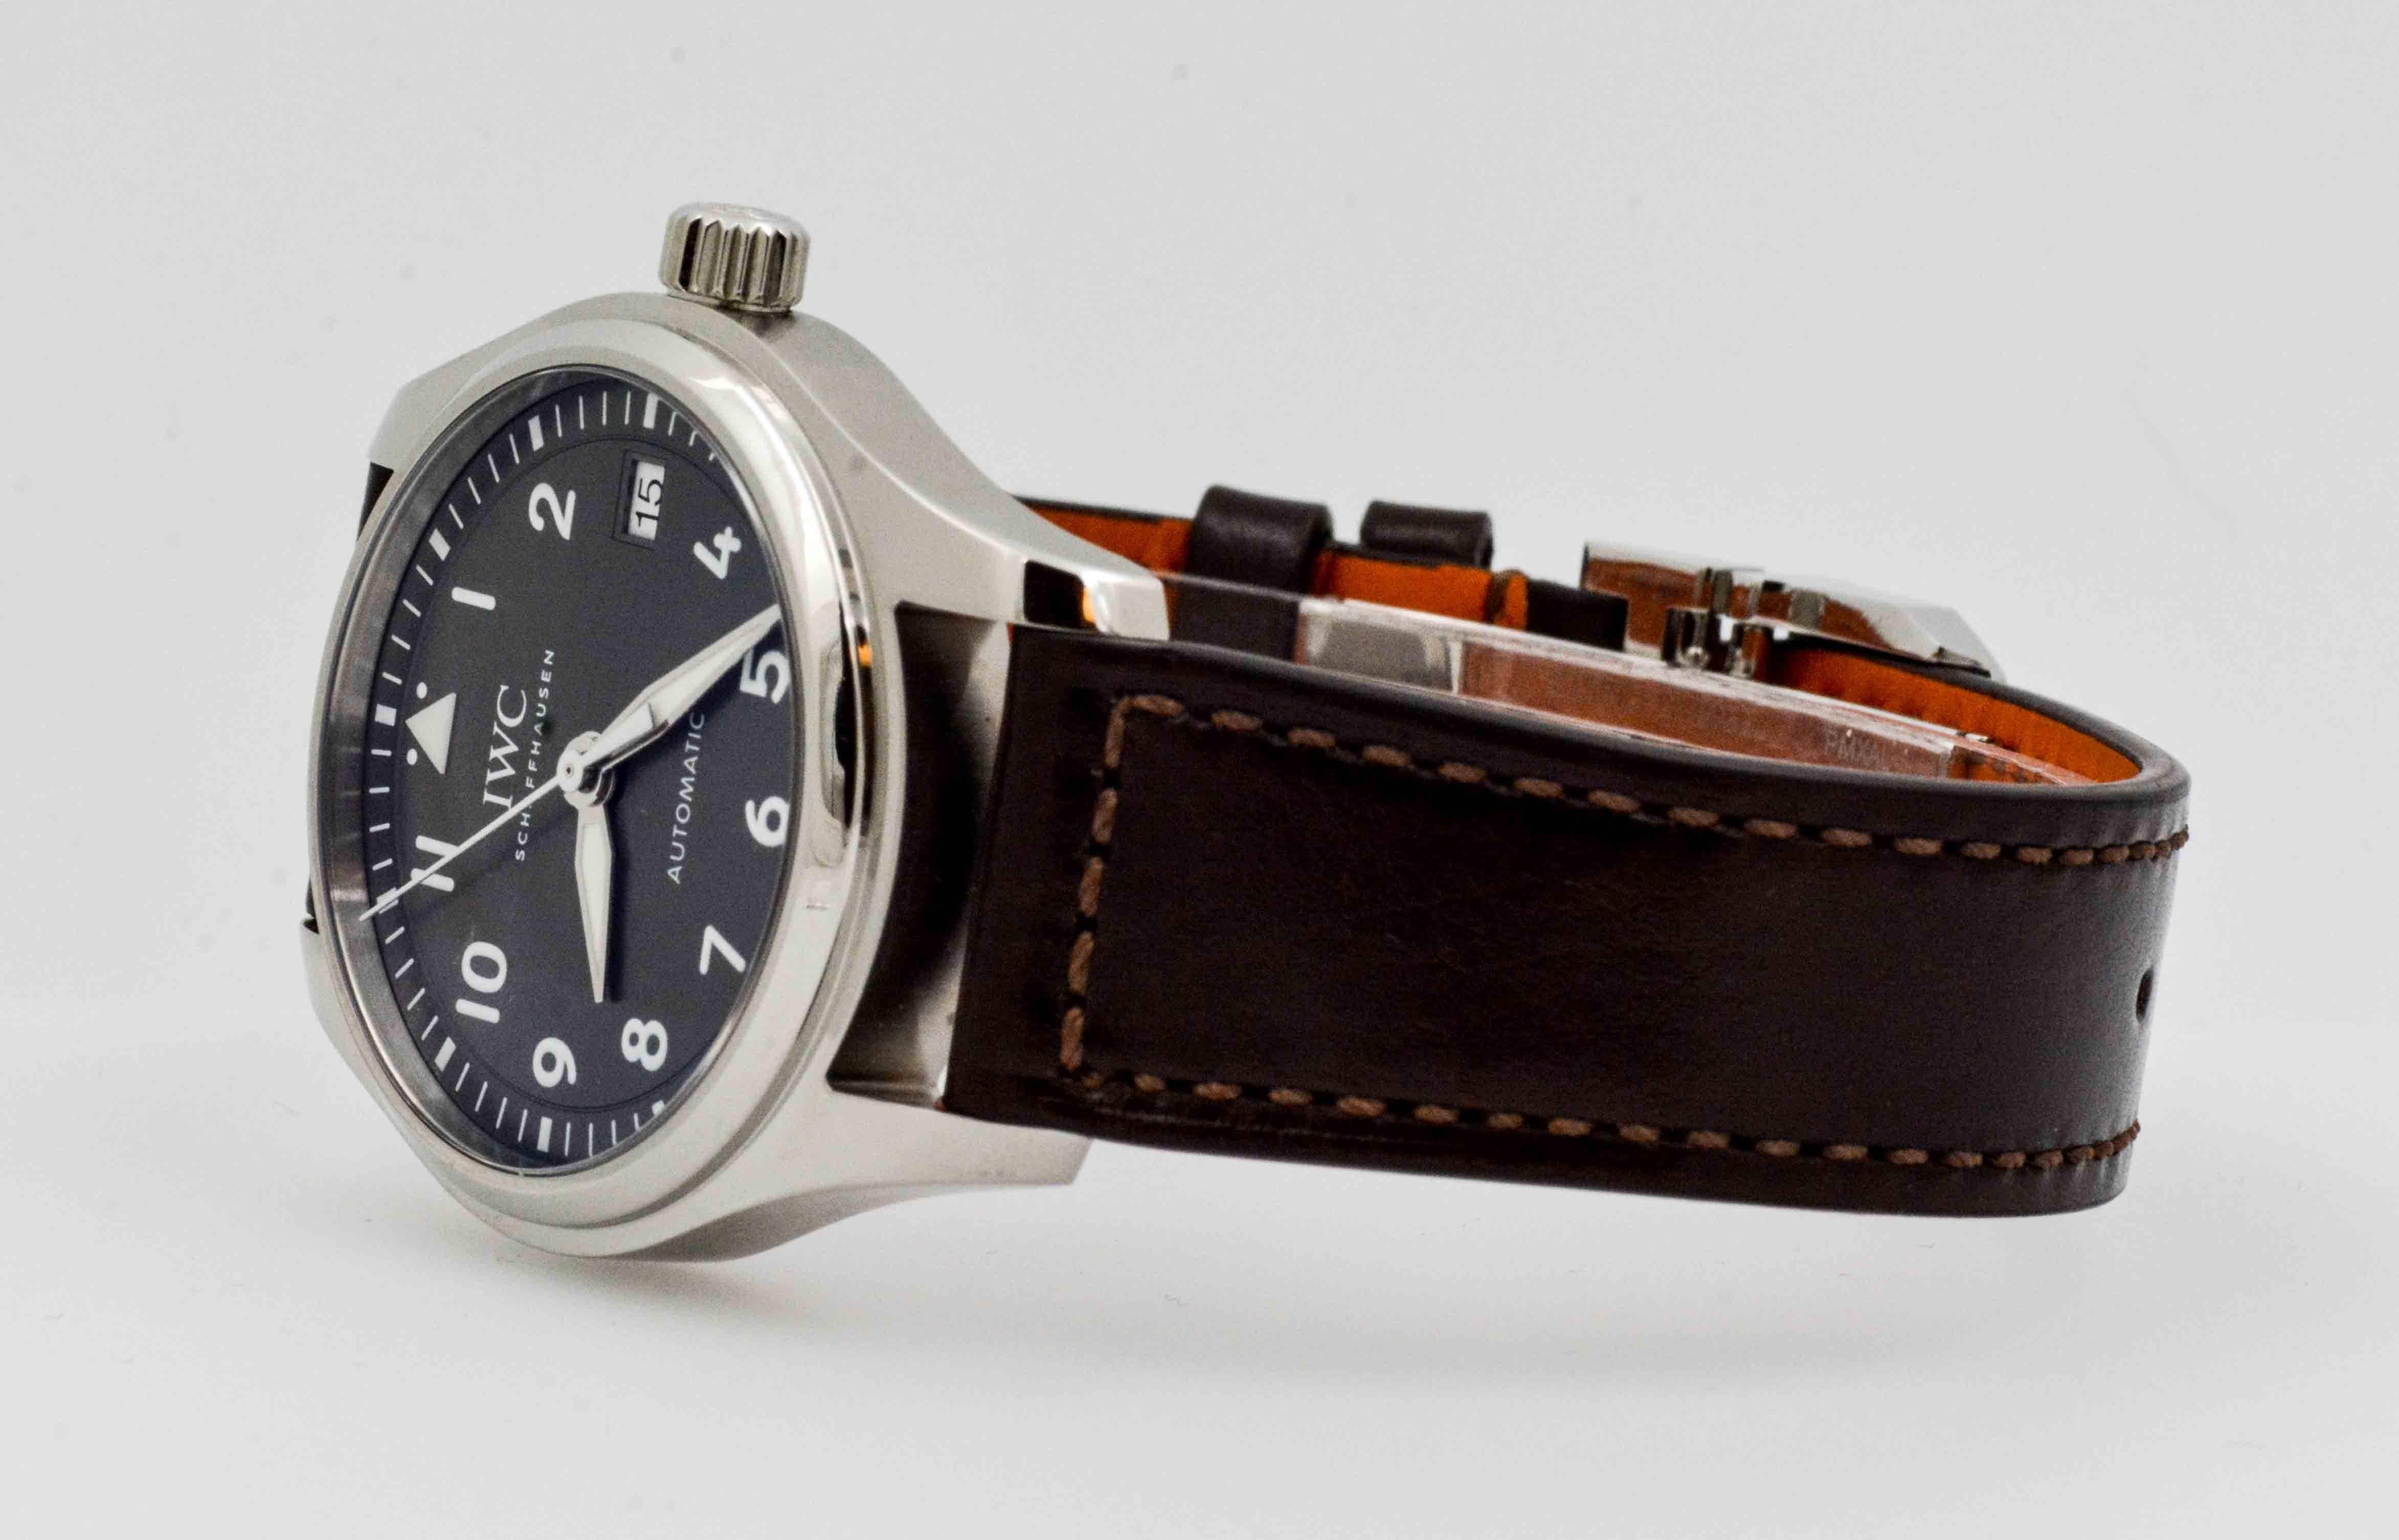 Classic style wrist watch with a striking slate gray Arabic dial face is exactly the time piece you will need to get you through your busy work day. This International Watch Company Pilot watch is 36 mm, has date, second hand and a classy brown